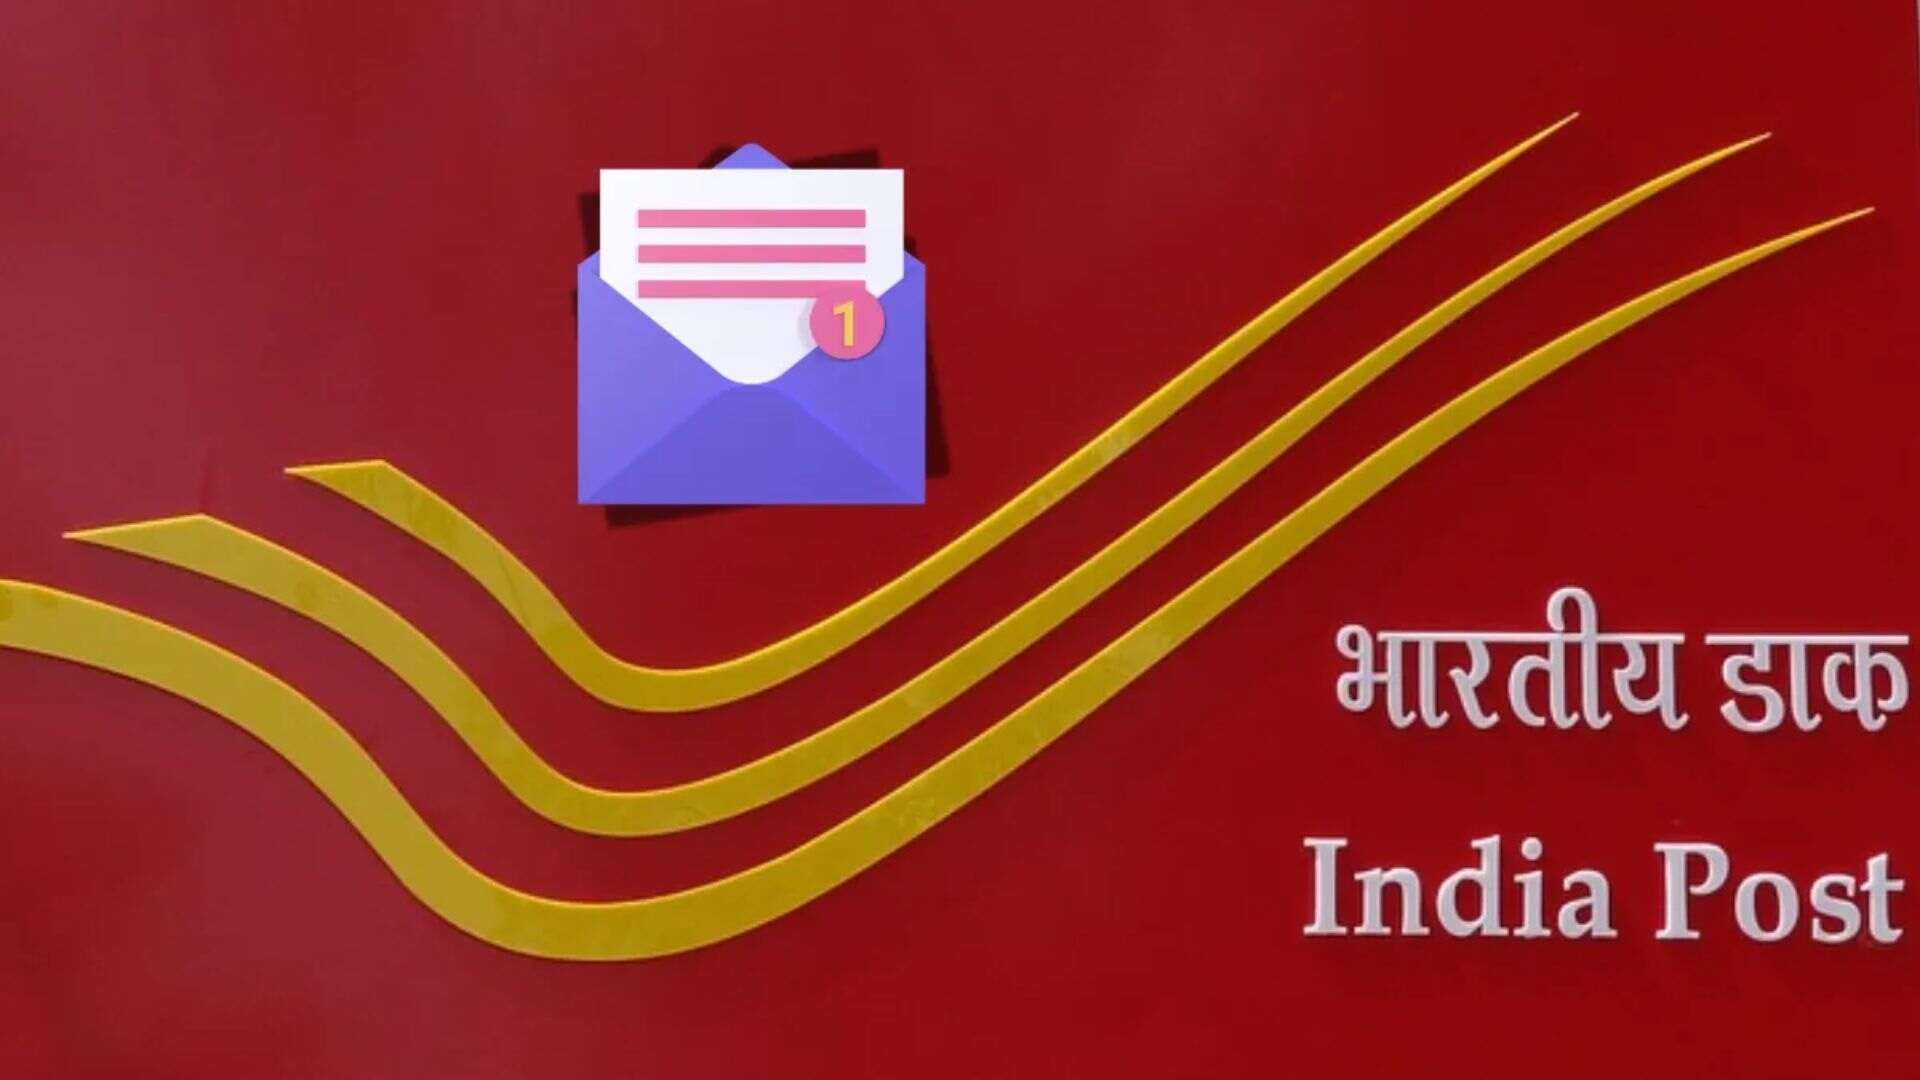 PIB Warns People About India Post SMS Scam, What Is This Scam & What Is Their Modus Operandi?